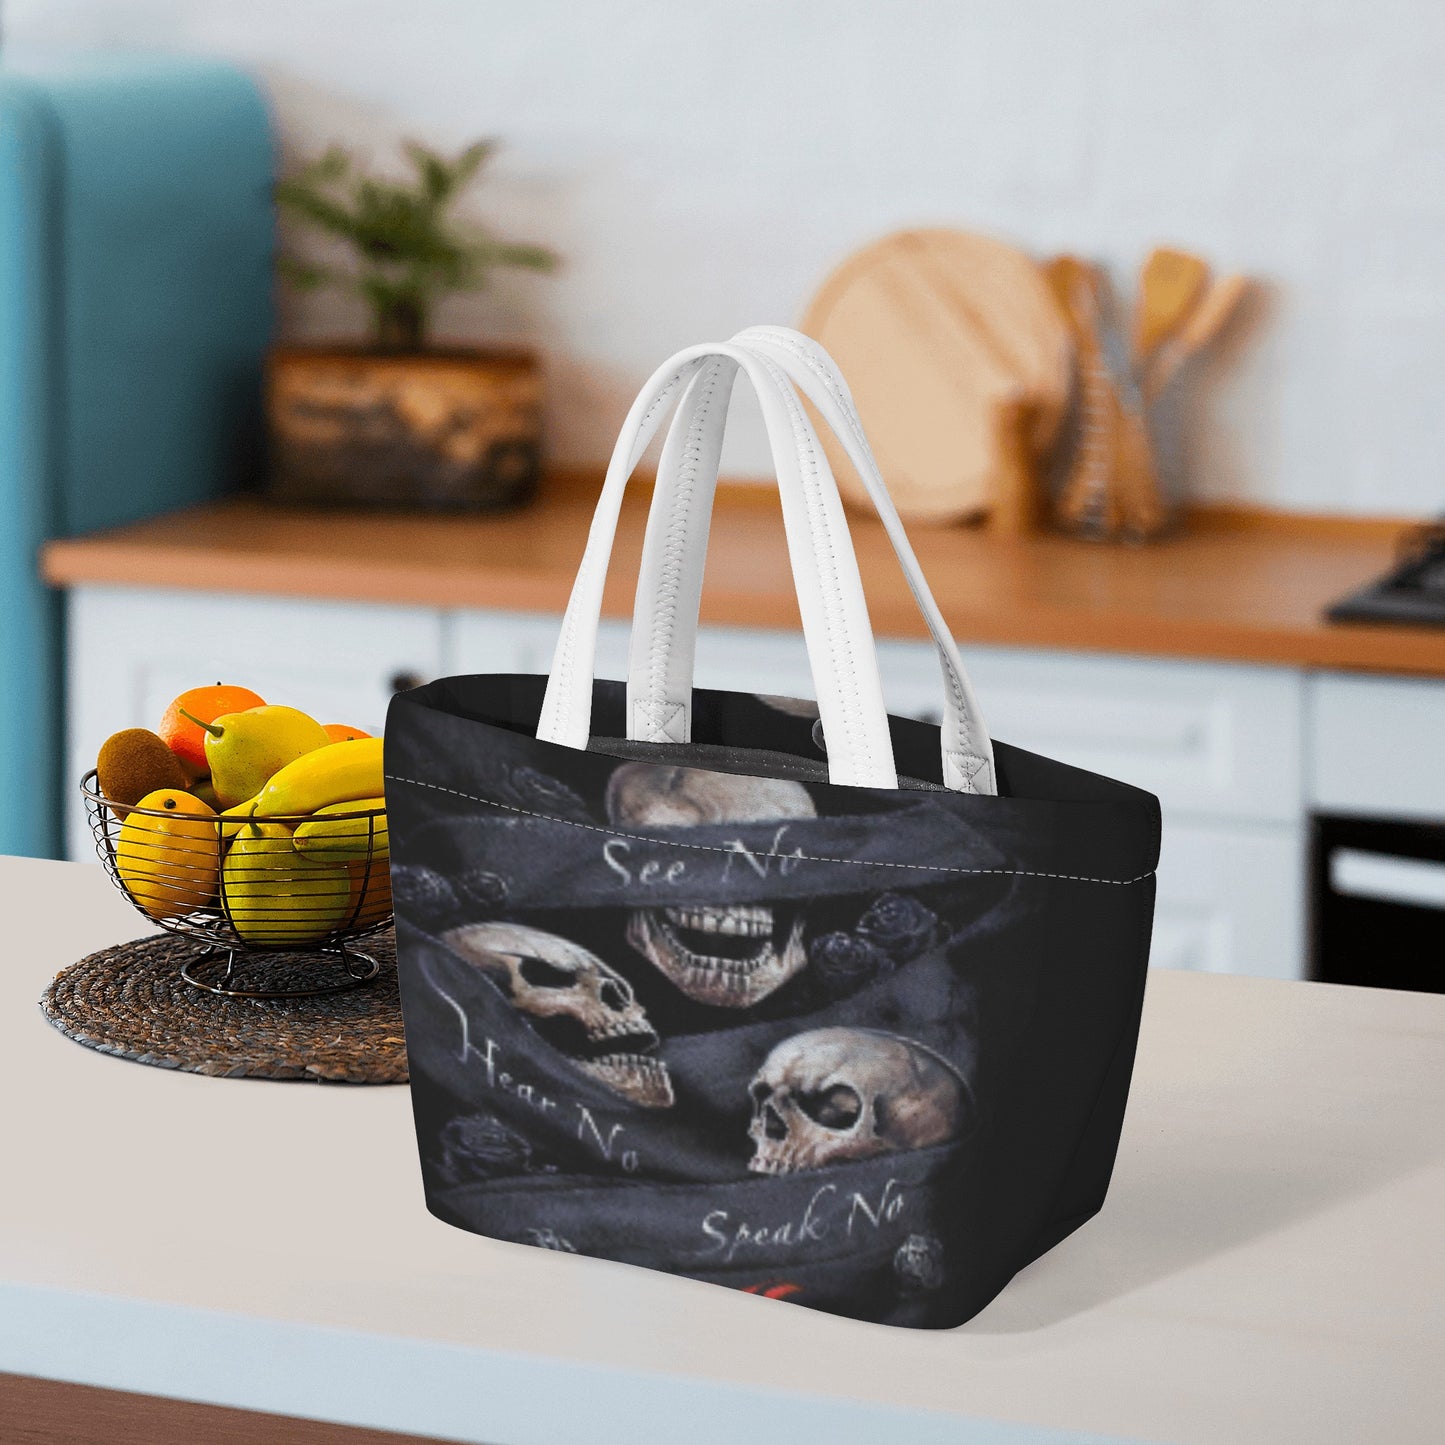 No see no hear no speak evils New Style Lunch Bag